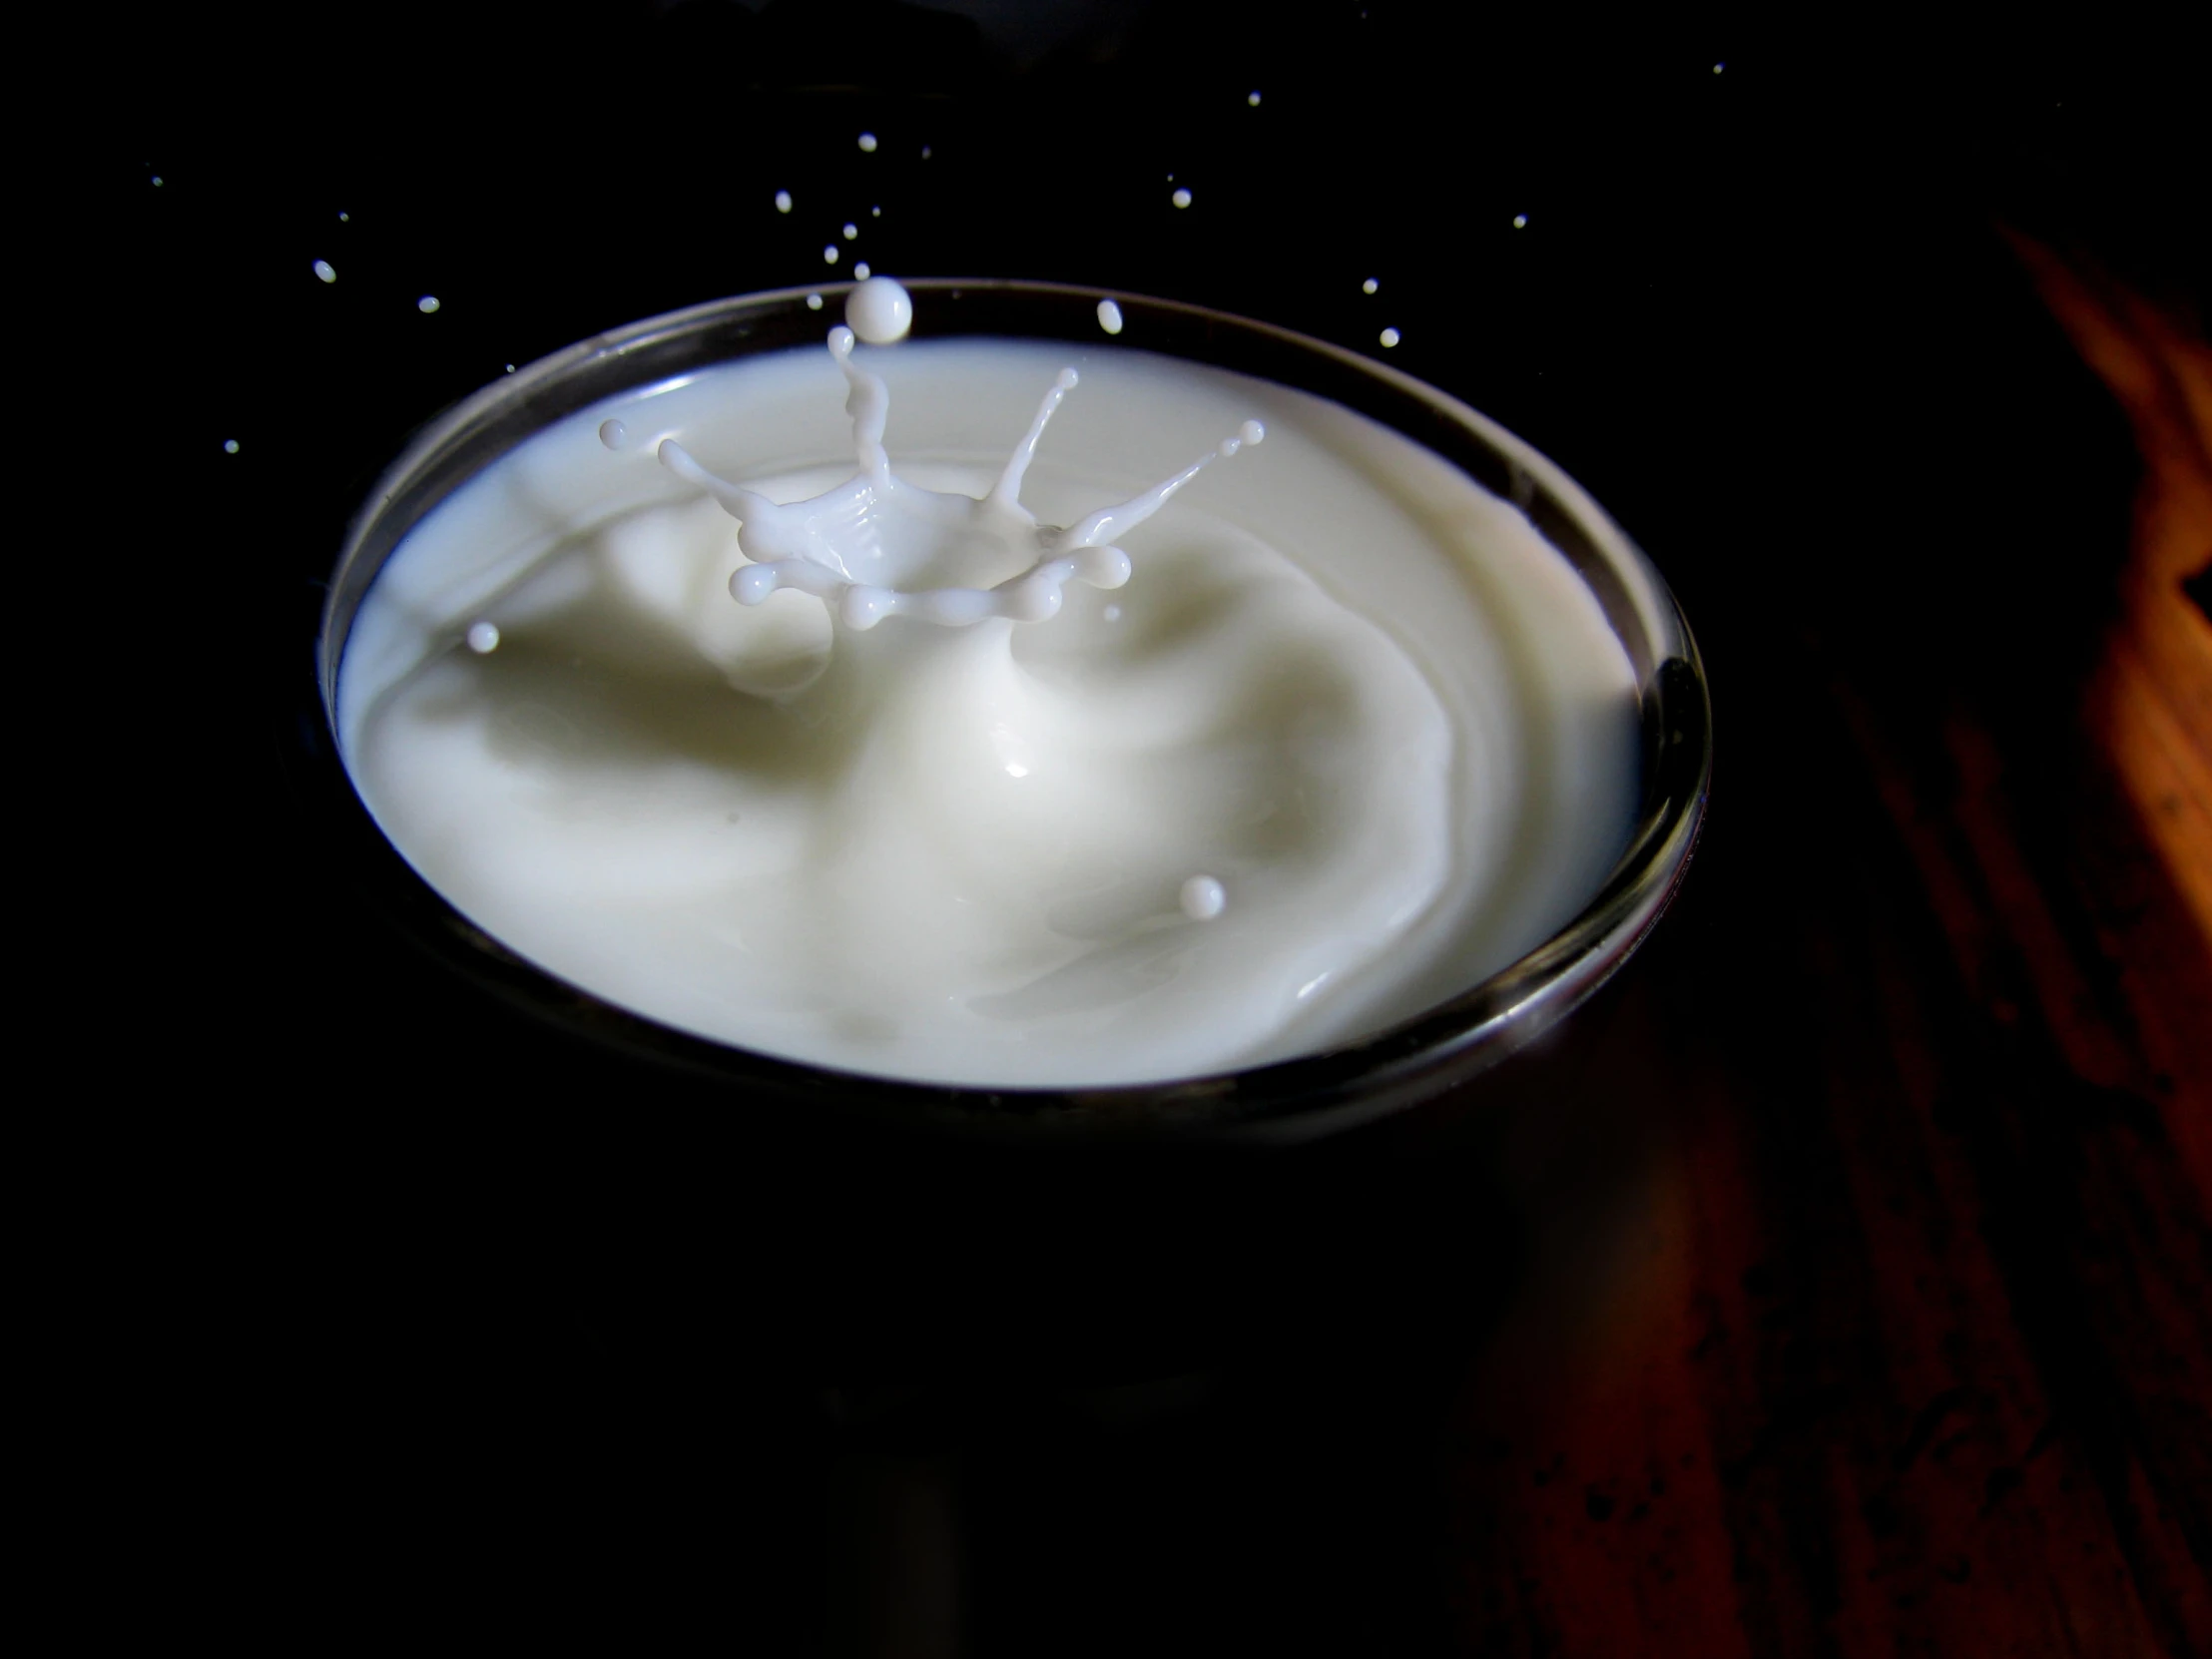 a glass of milk with a white liquid